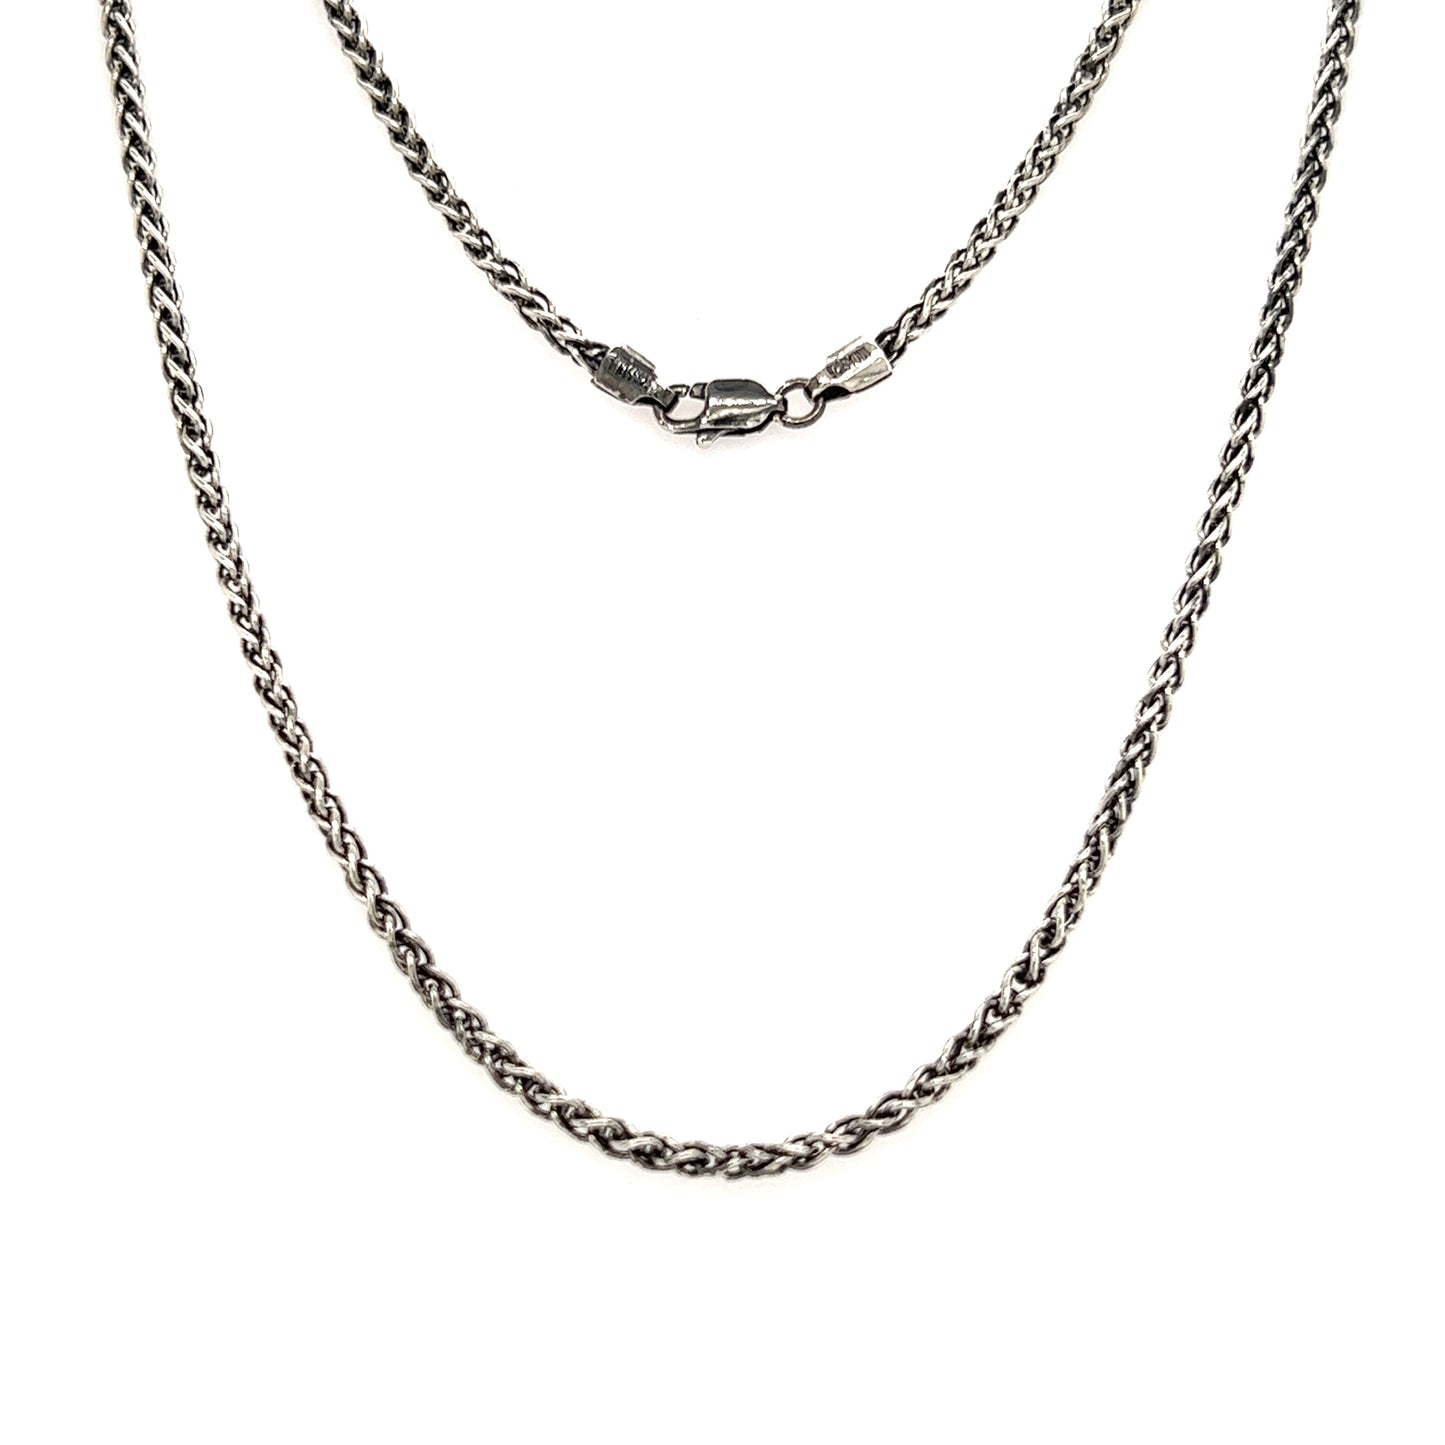 Oxidized Wheat 2.25mm Chain with 20in of Length in Sterling Silver Full Chain View